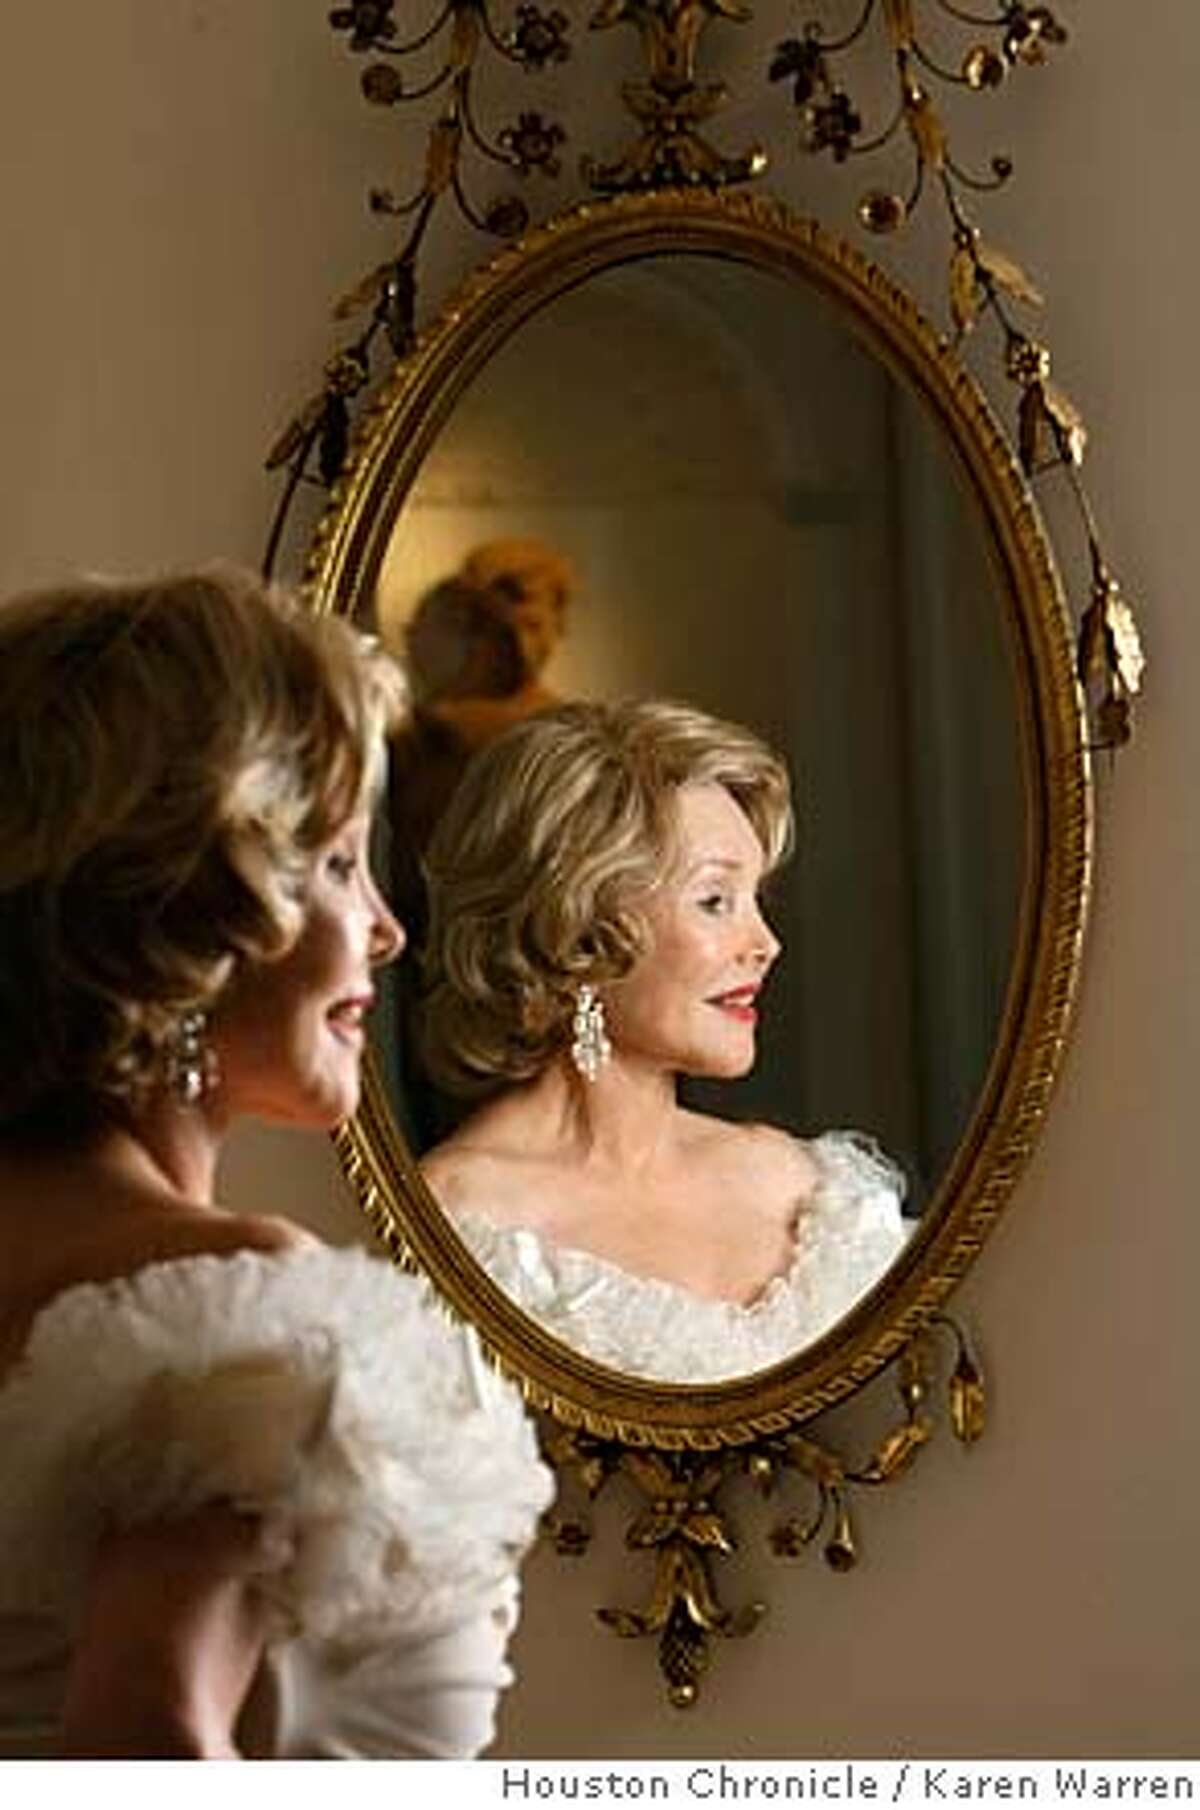 Joanne Herring, a Houston socialite who is also a political operative and will be portrayed by Julia Roberts in a movie called "Charlie Wilson's War", coming out later this year. Herring was photographed at her Houston home, Tuesday, January 30, 2007. (Karen Warren/ Houston Chronicle) DIGITAL IMAGE: MANDATORY CREDIT